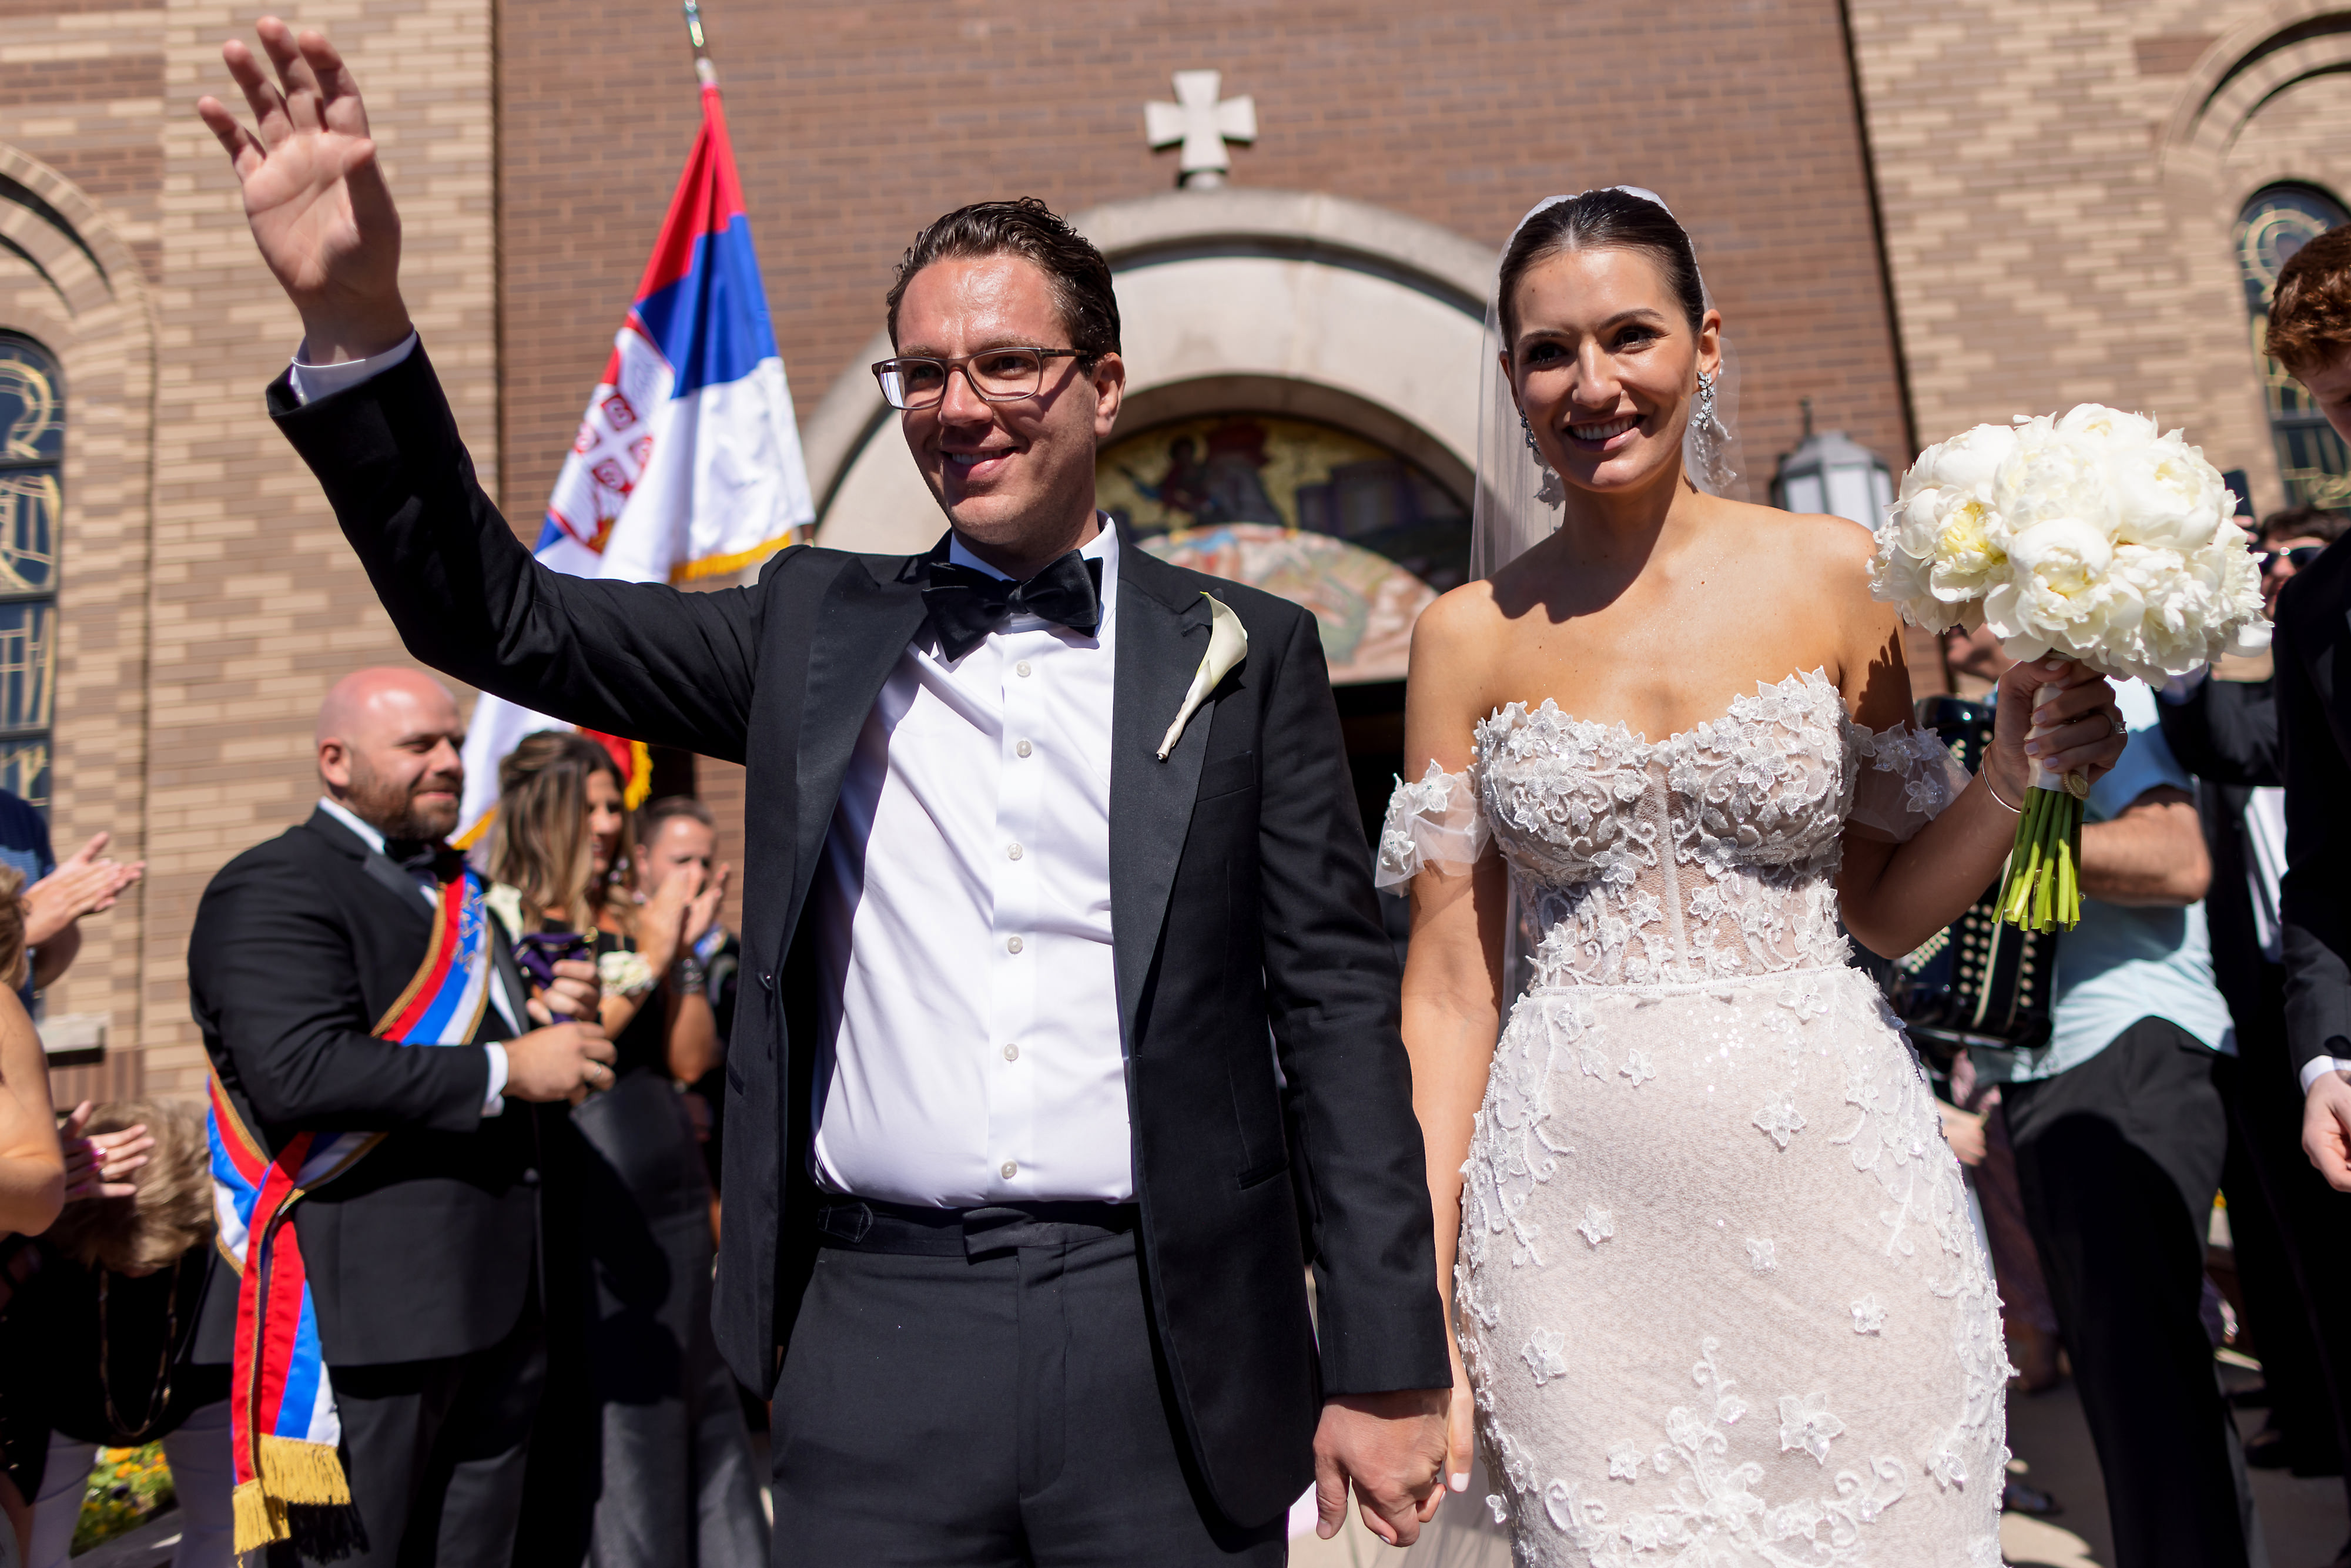 Bride and groom walk outside after wedding ceremony at George Serbian Orthodox Church